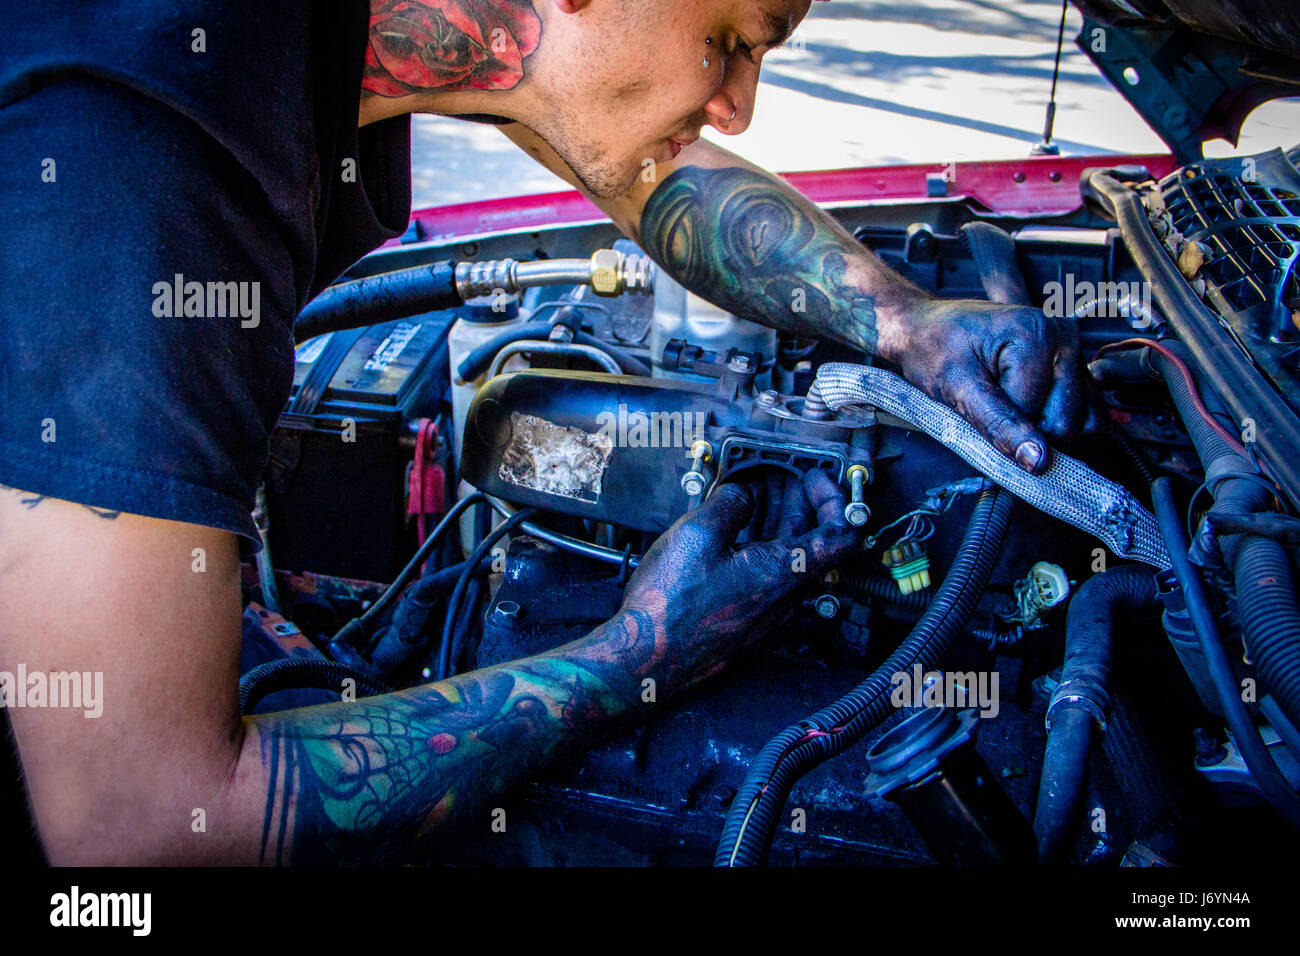 Man with tattoos working on car engine Stock Photo